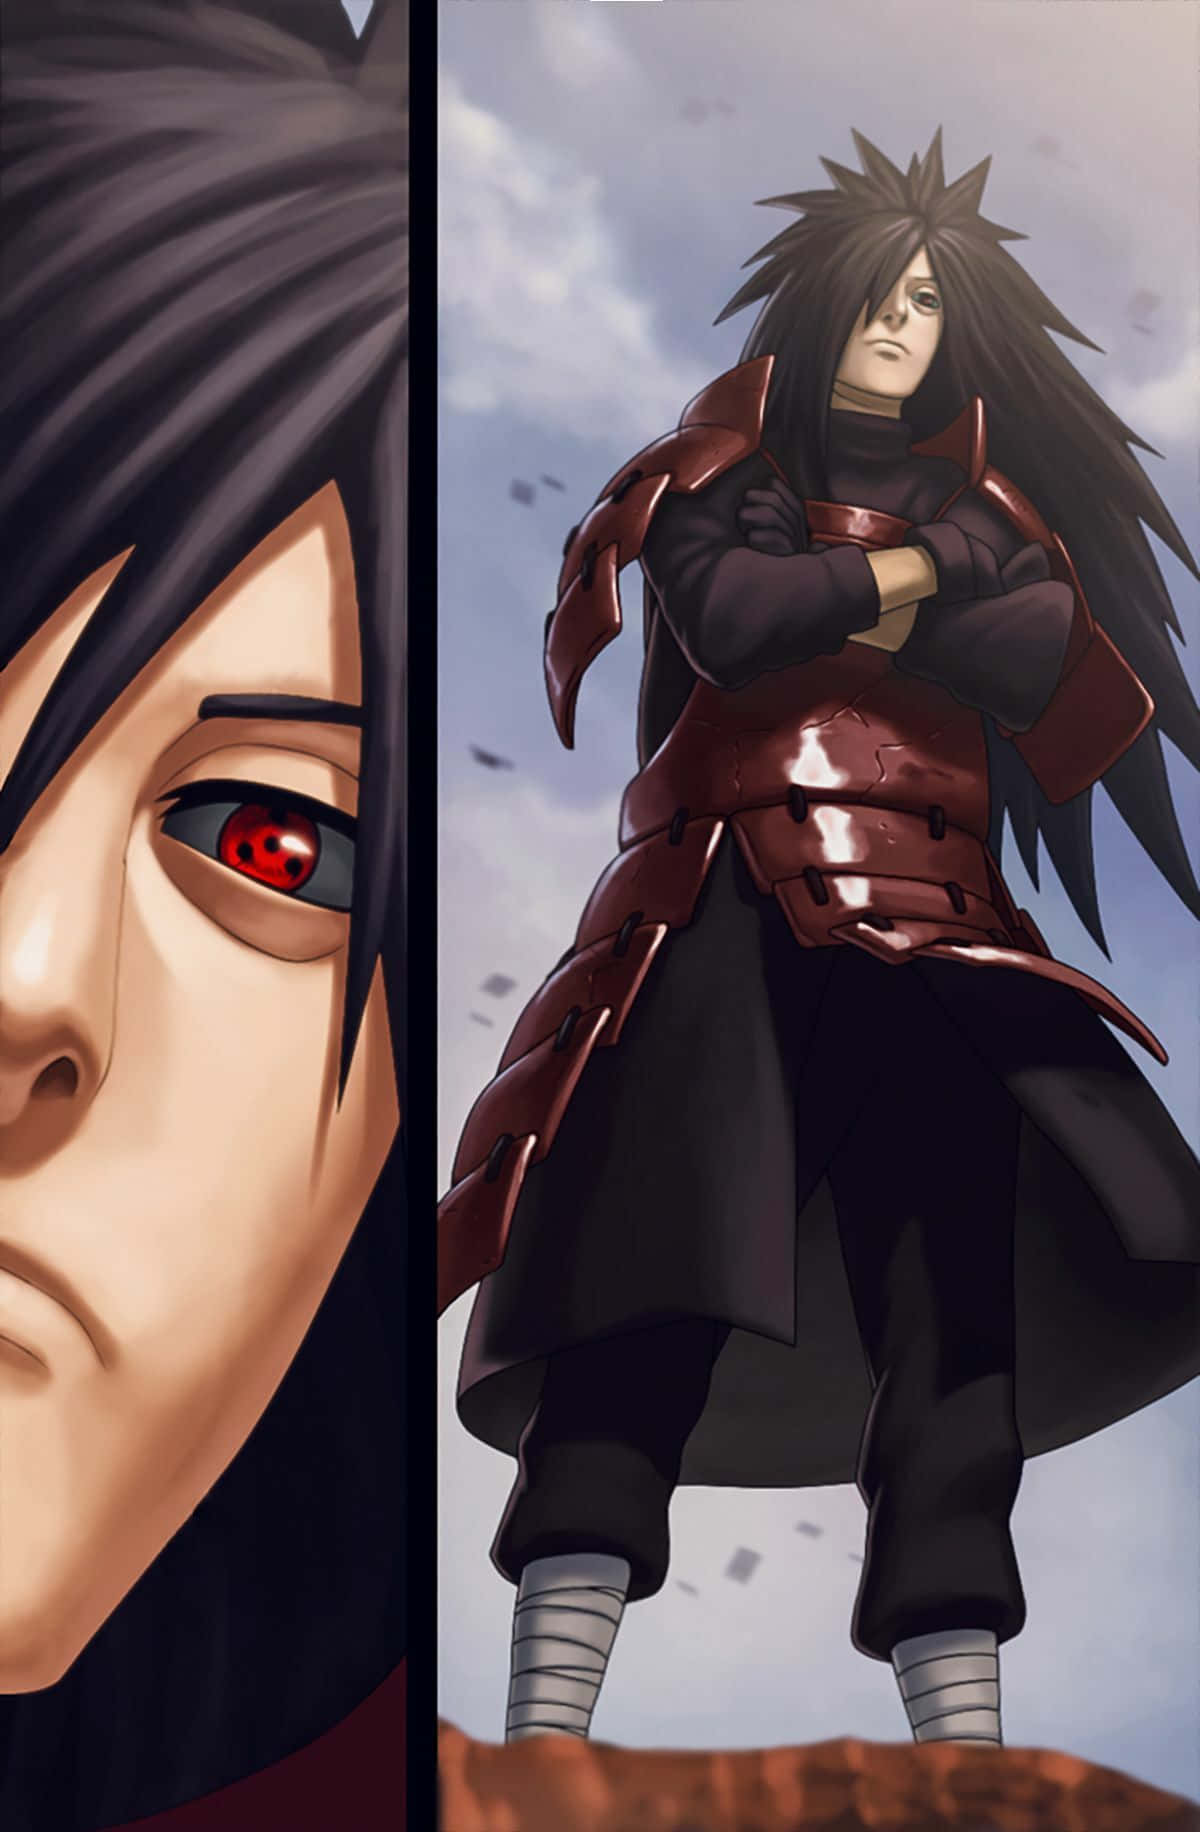 Madara Uchiha, leader of the Uchiha clan, unleashes his power in the Land of Fire.